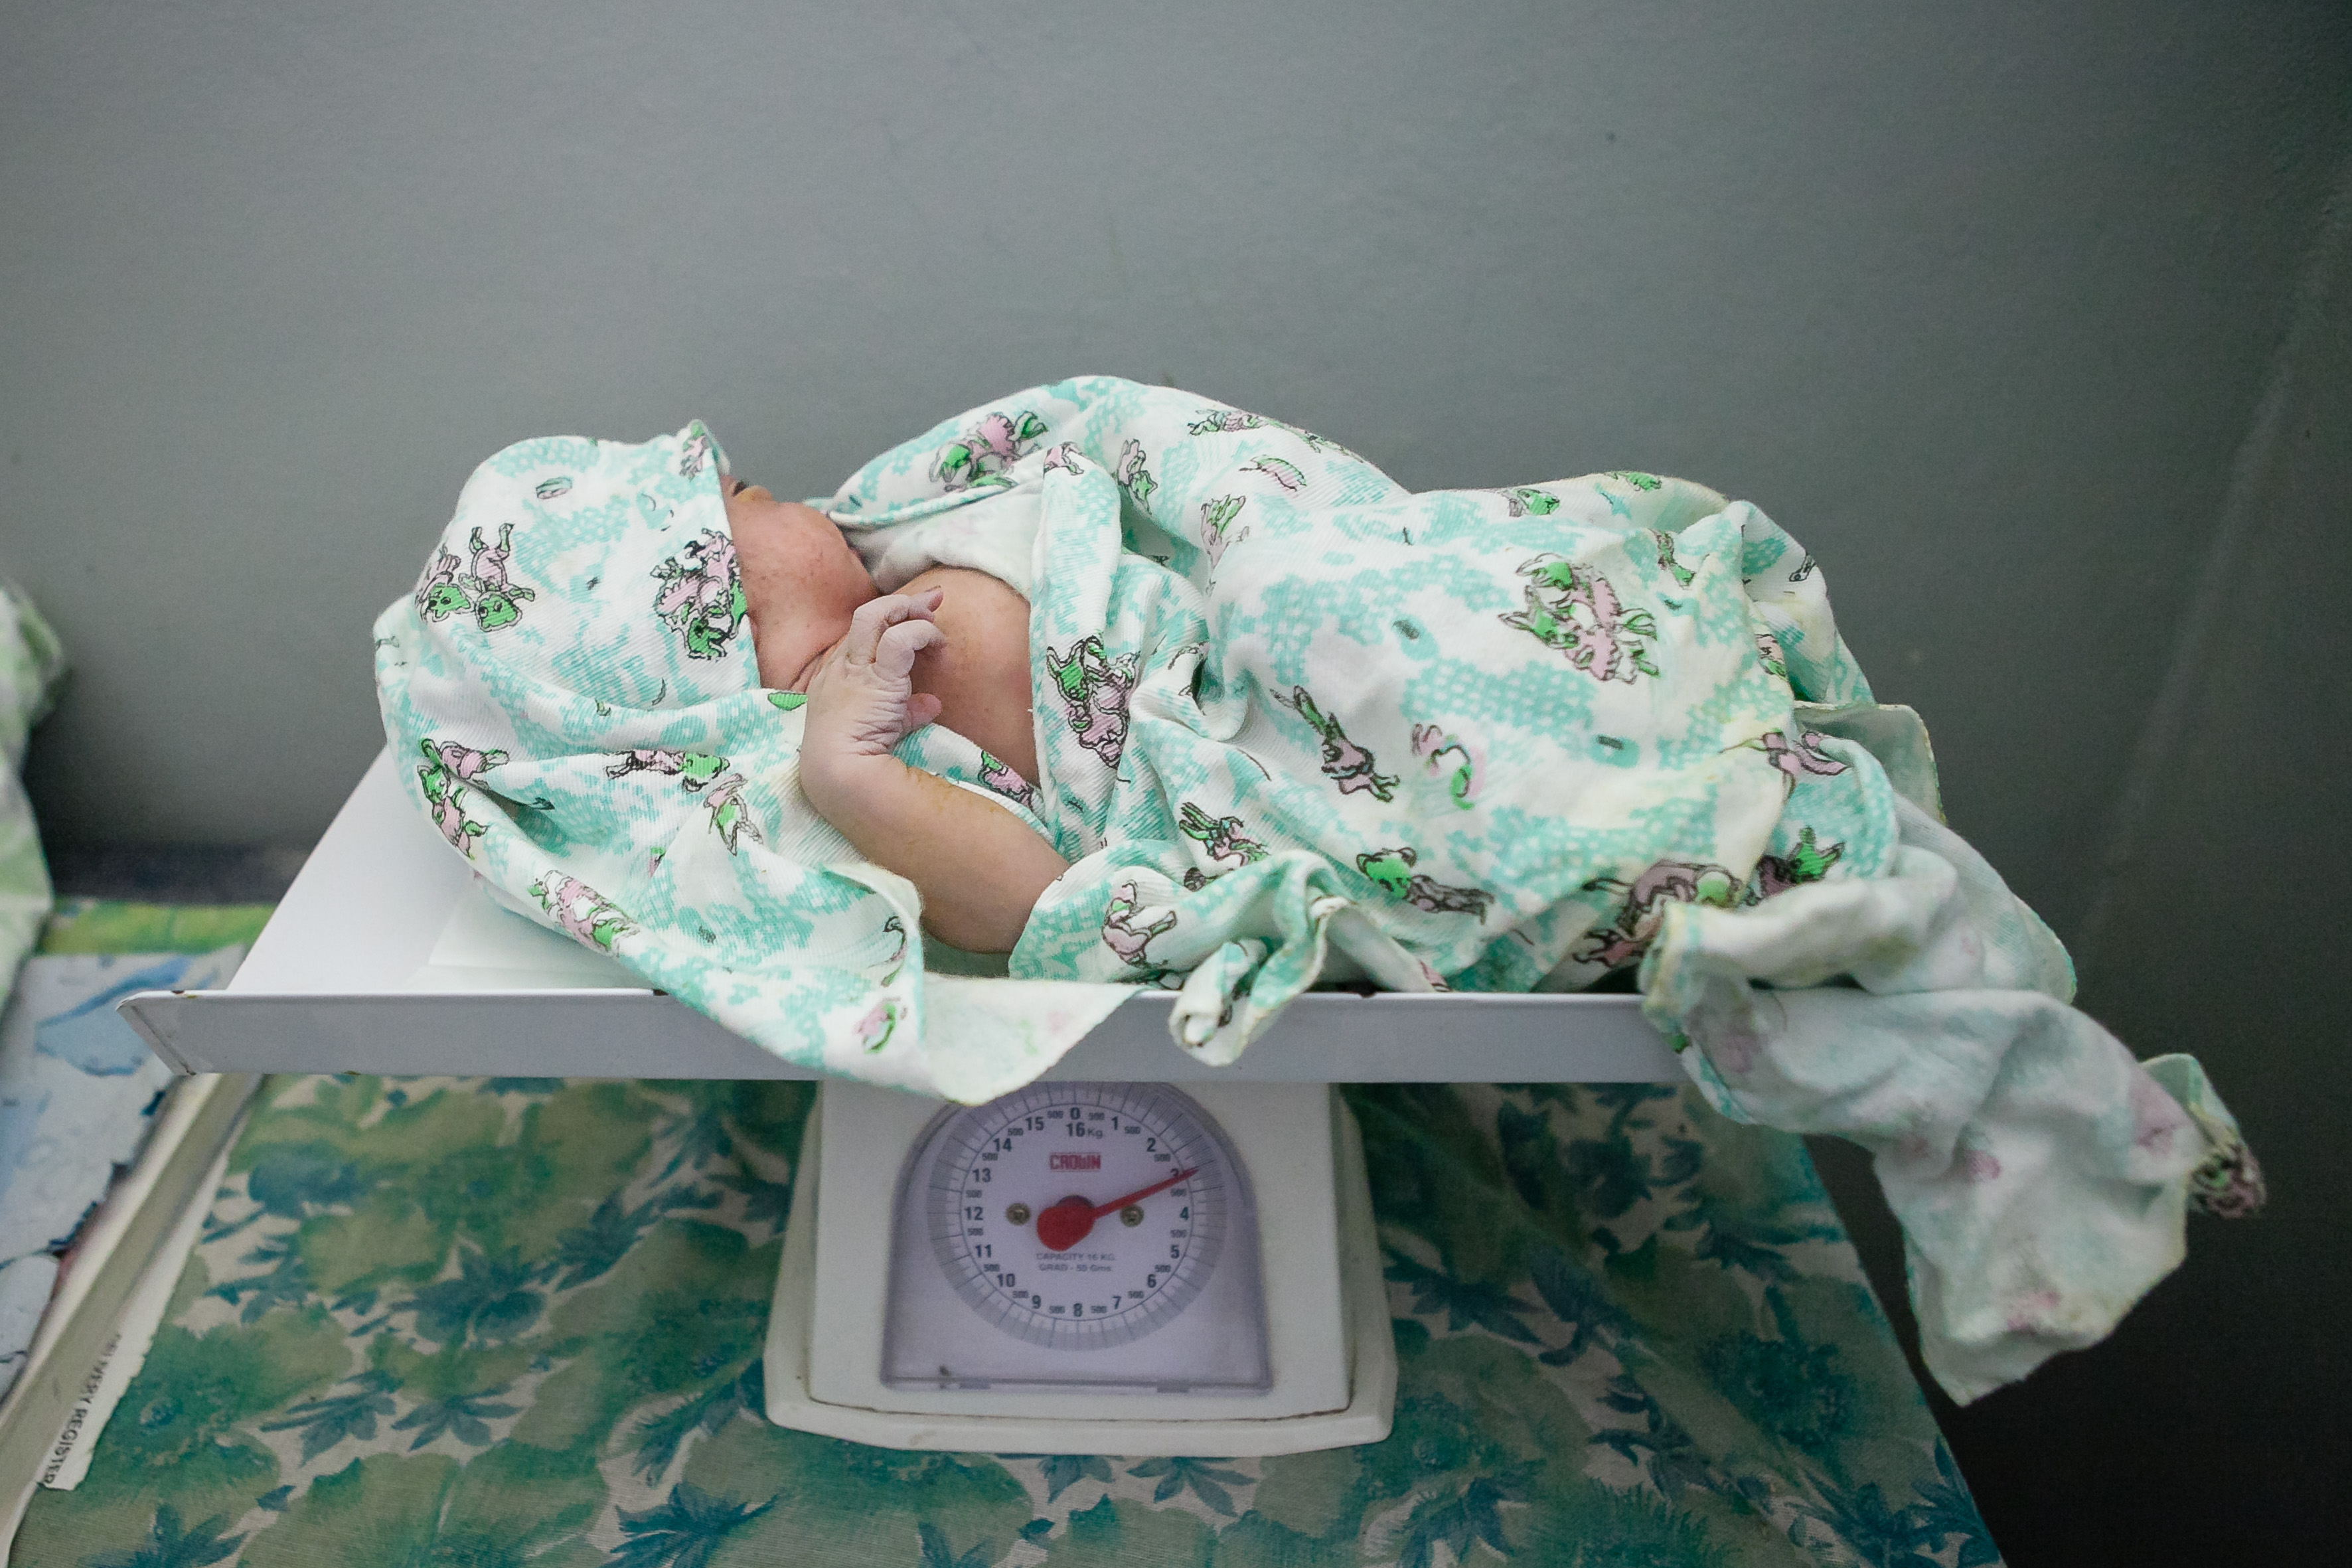 The term ‘low birth weight’ applies to any baby born less than 2.5kg. Image credit: IDEAS.